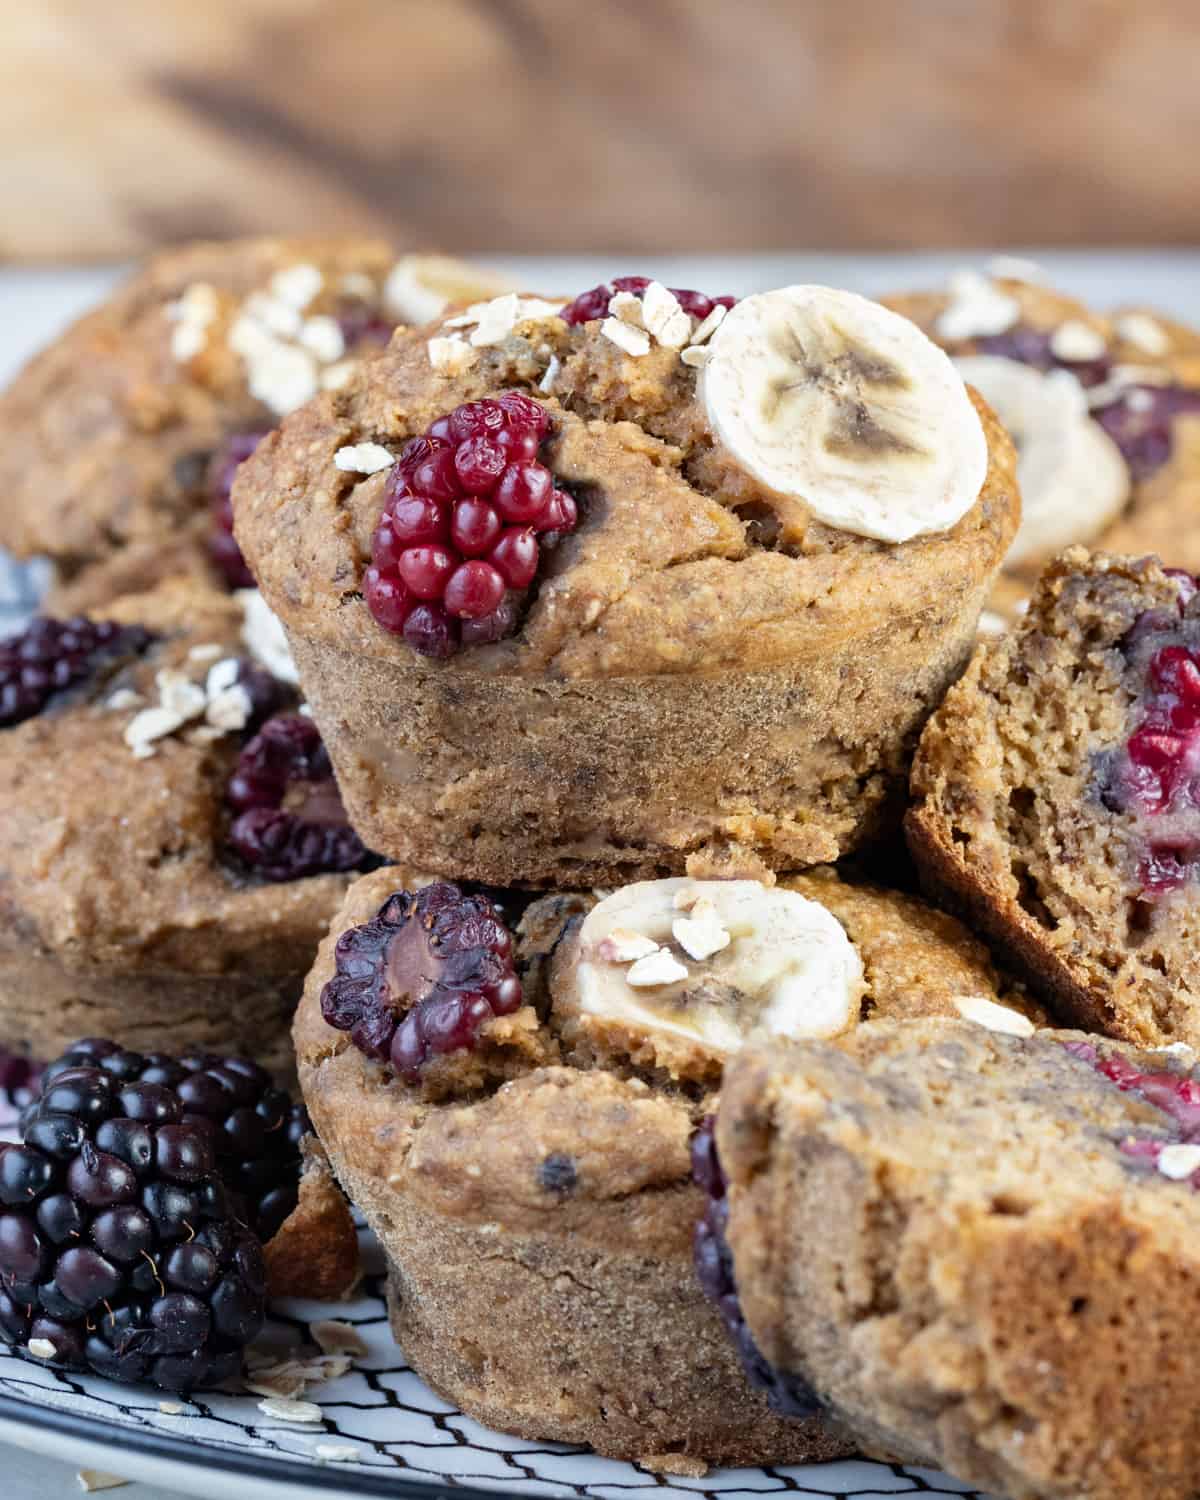 Oatmeal muffins with vibrant blackberries and banana slices on top, showcased on a light-colored plate with a rustic backdrop.